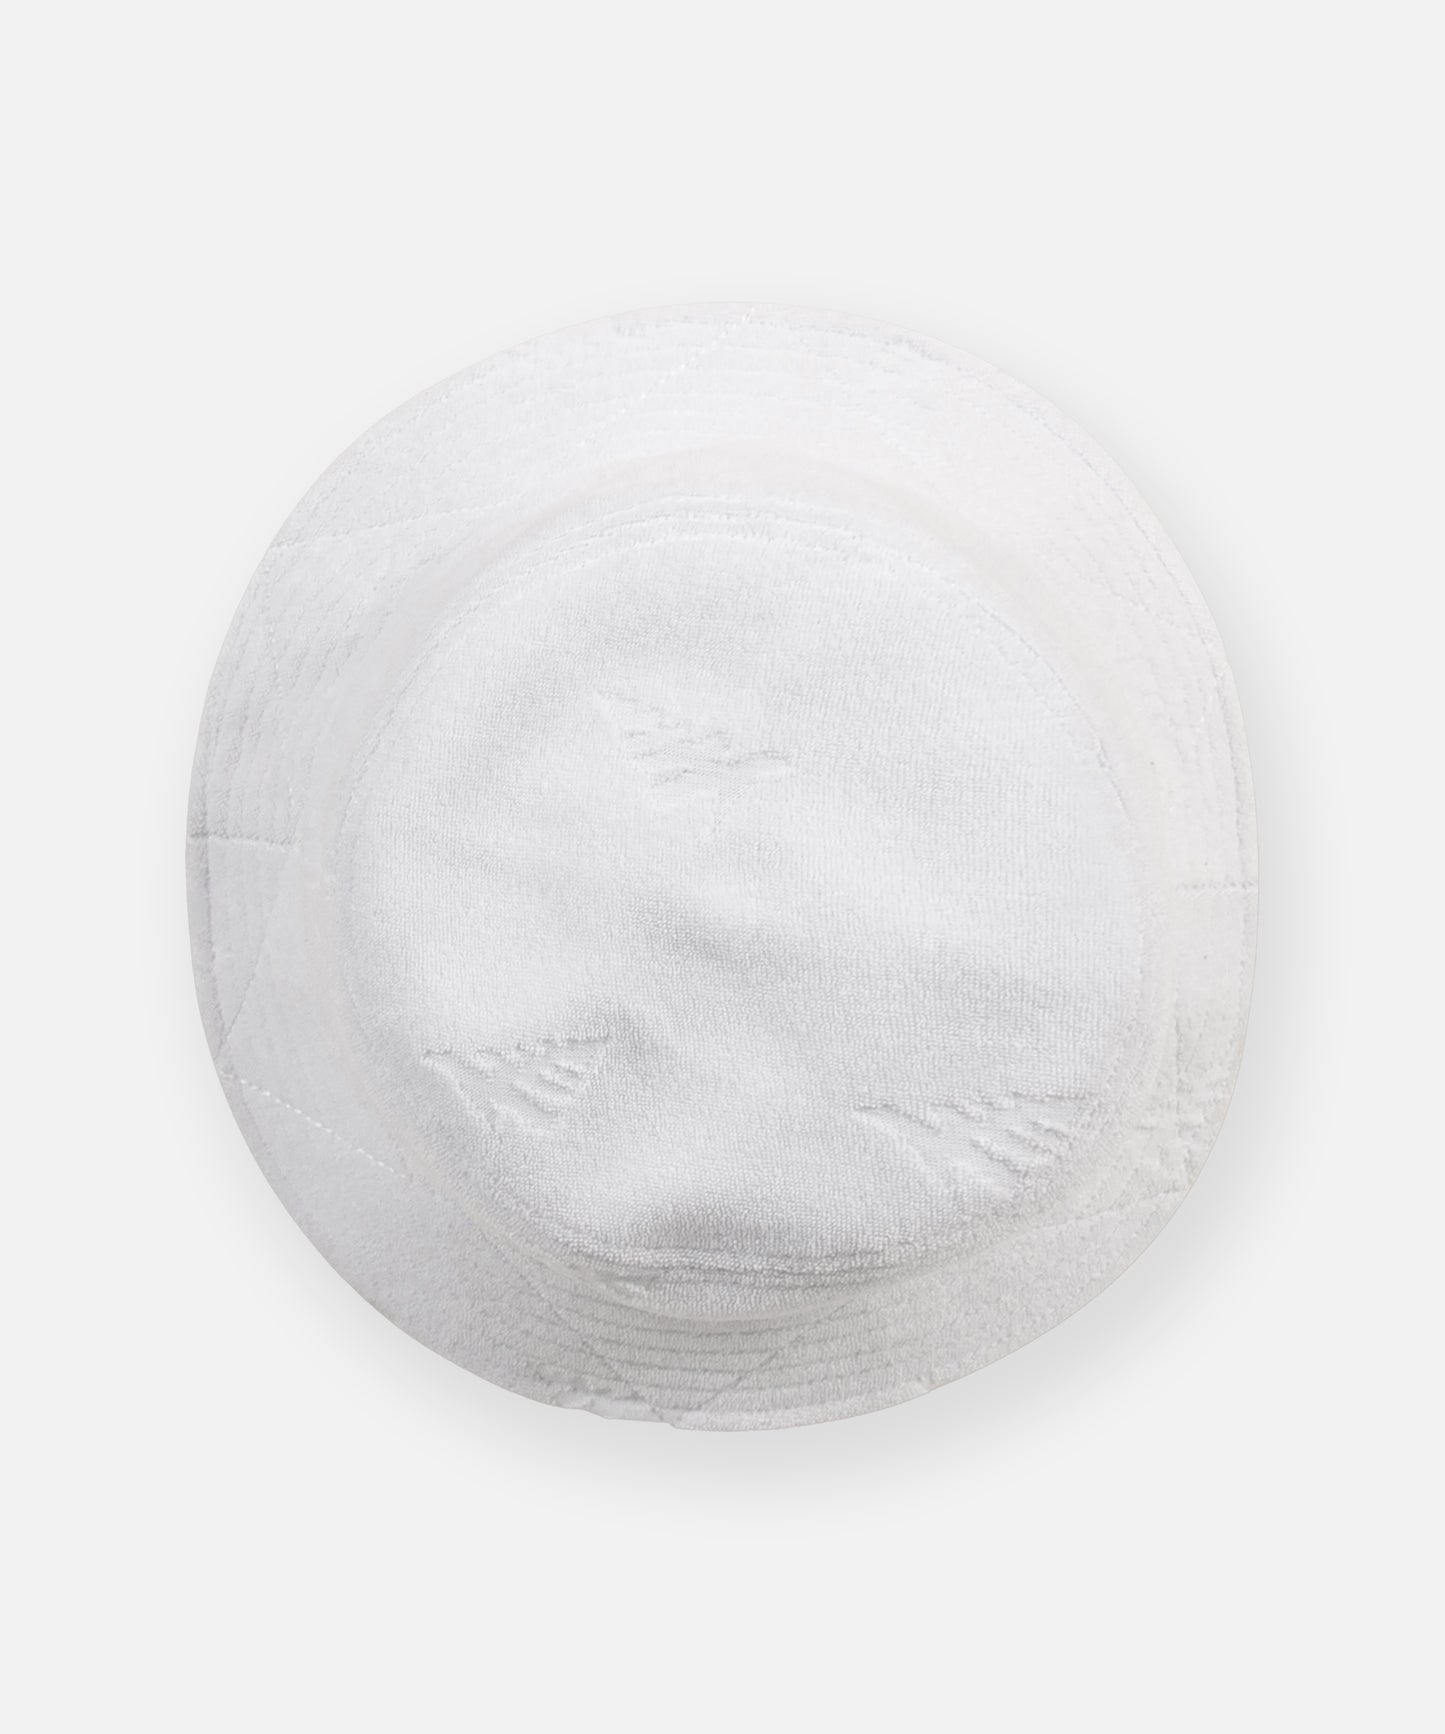 CUSTOM_ALT_TEXT: Top view of Paper Planes Jacquard Terry Cloth Bucket Hat color White.